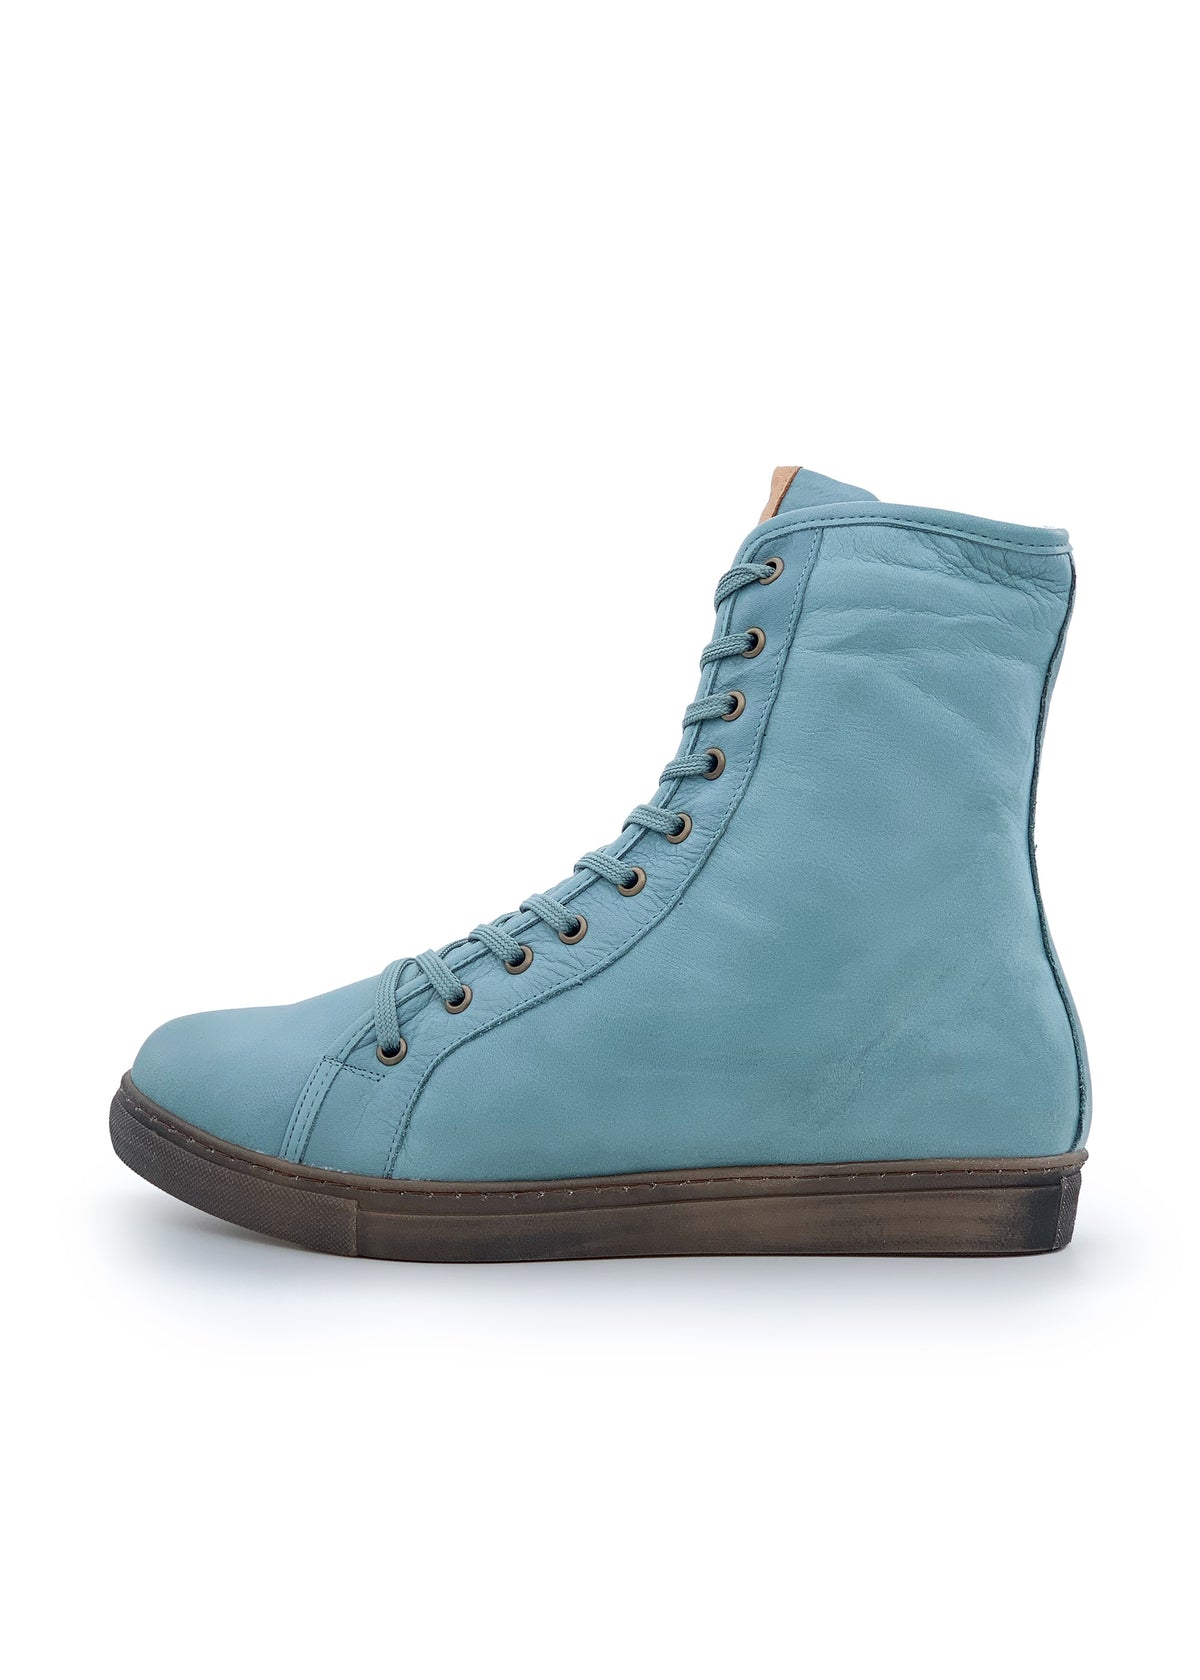 Winter ankle boots - petrol blue, brown sole